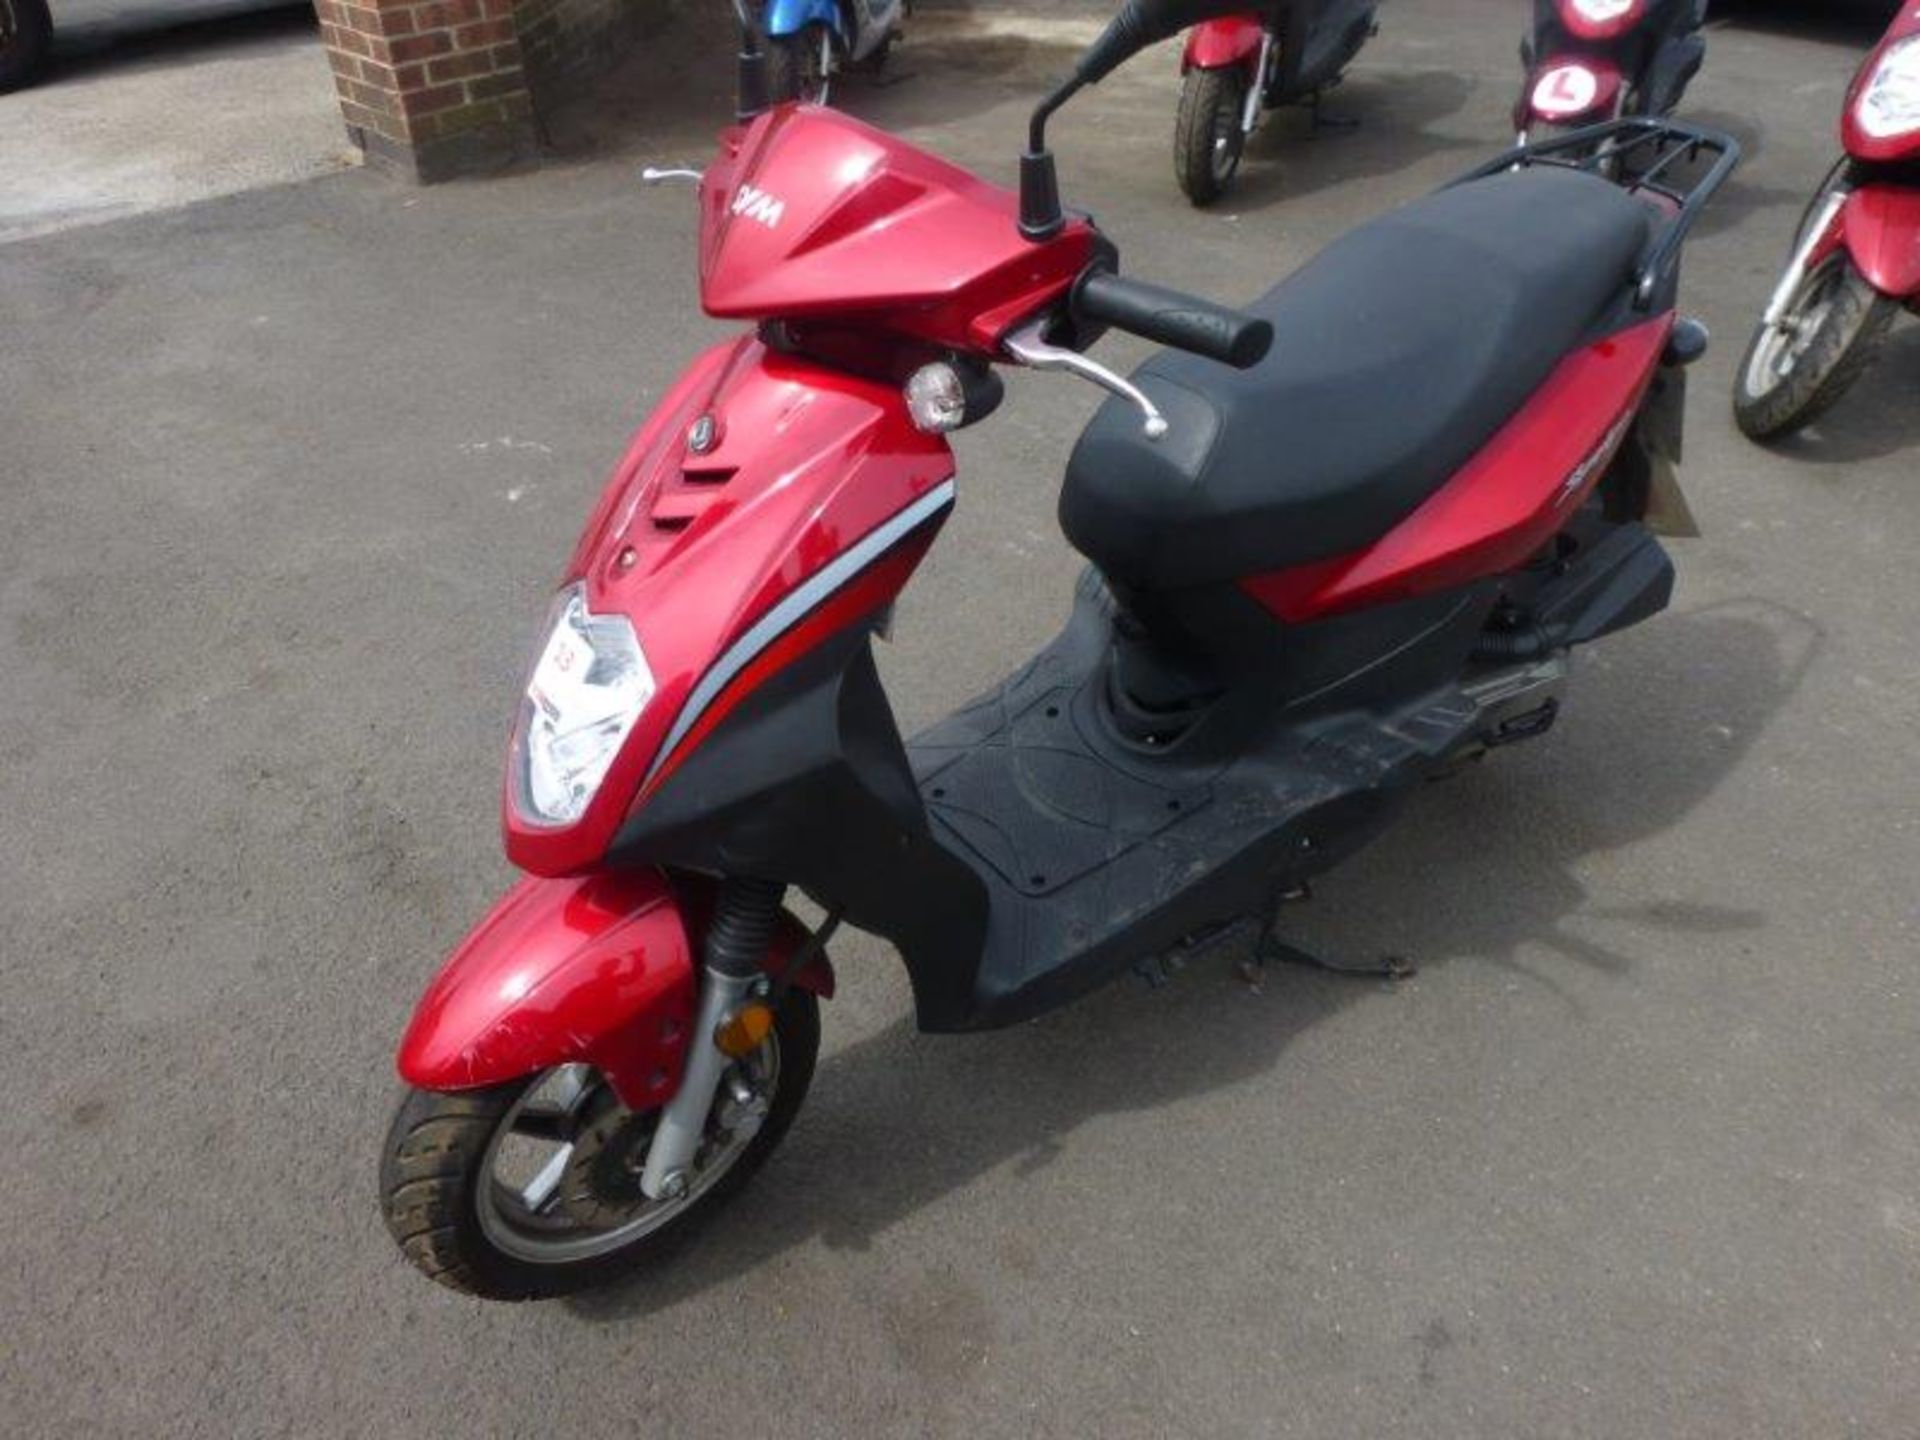 Sym Symply50 AV05W-6 moped, 49cc (Red)  Registration no. MJ63 RXW  Date of registration: 19/11/2013 - Image 2 of 4